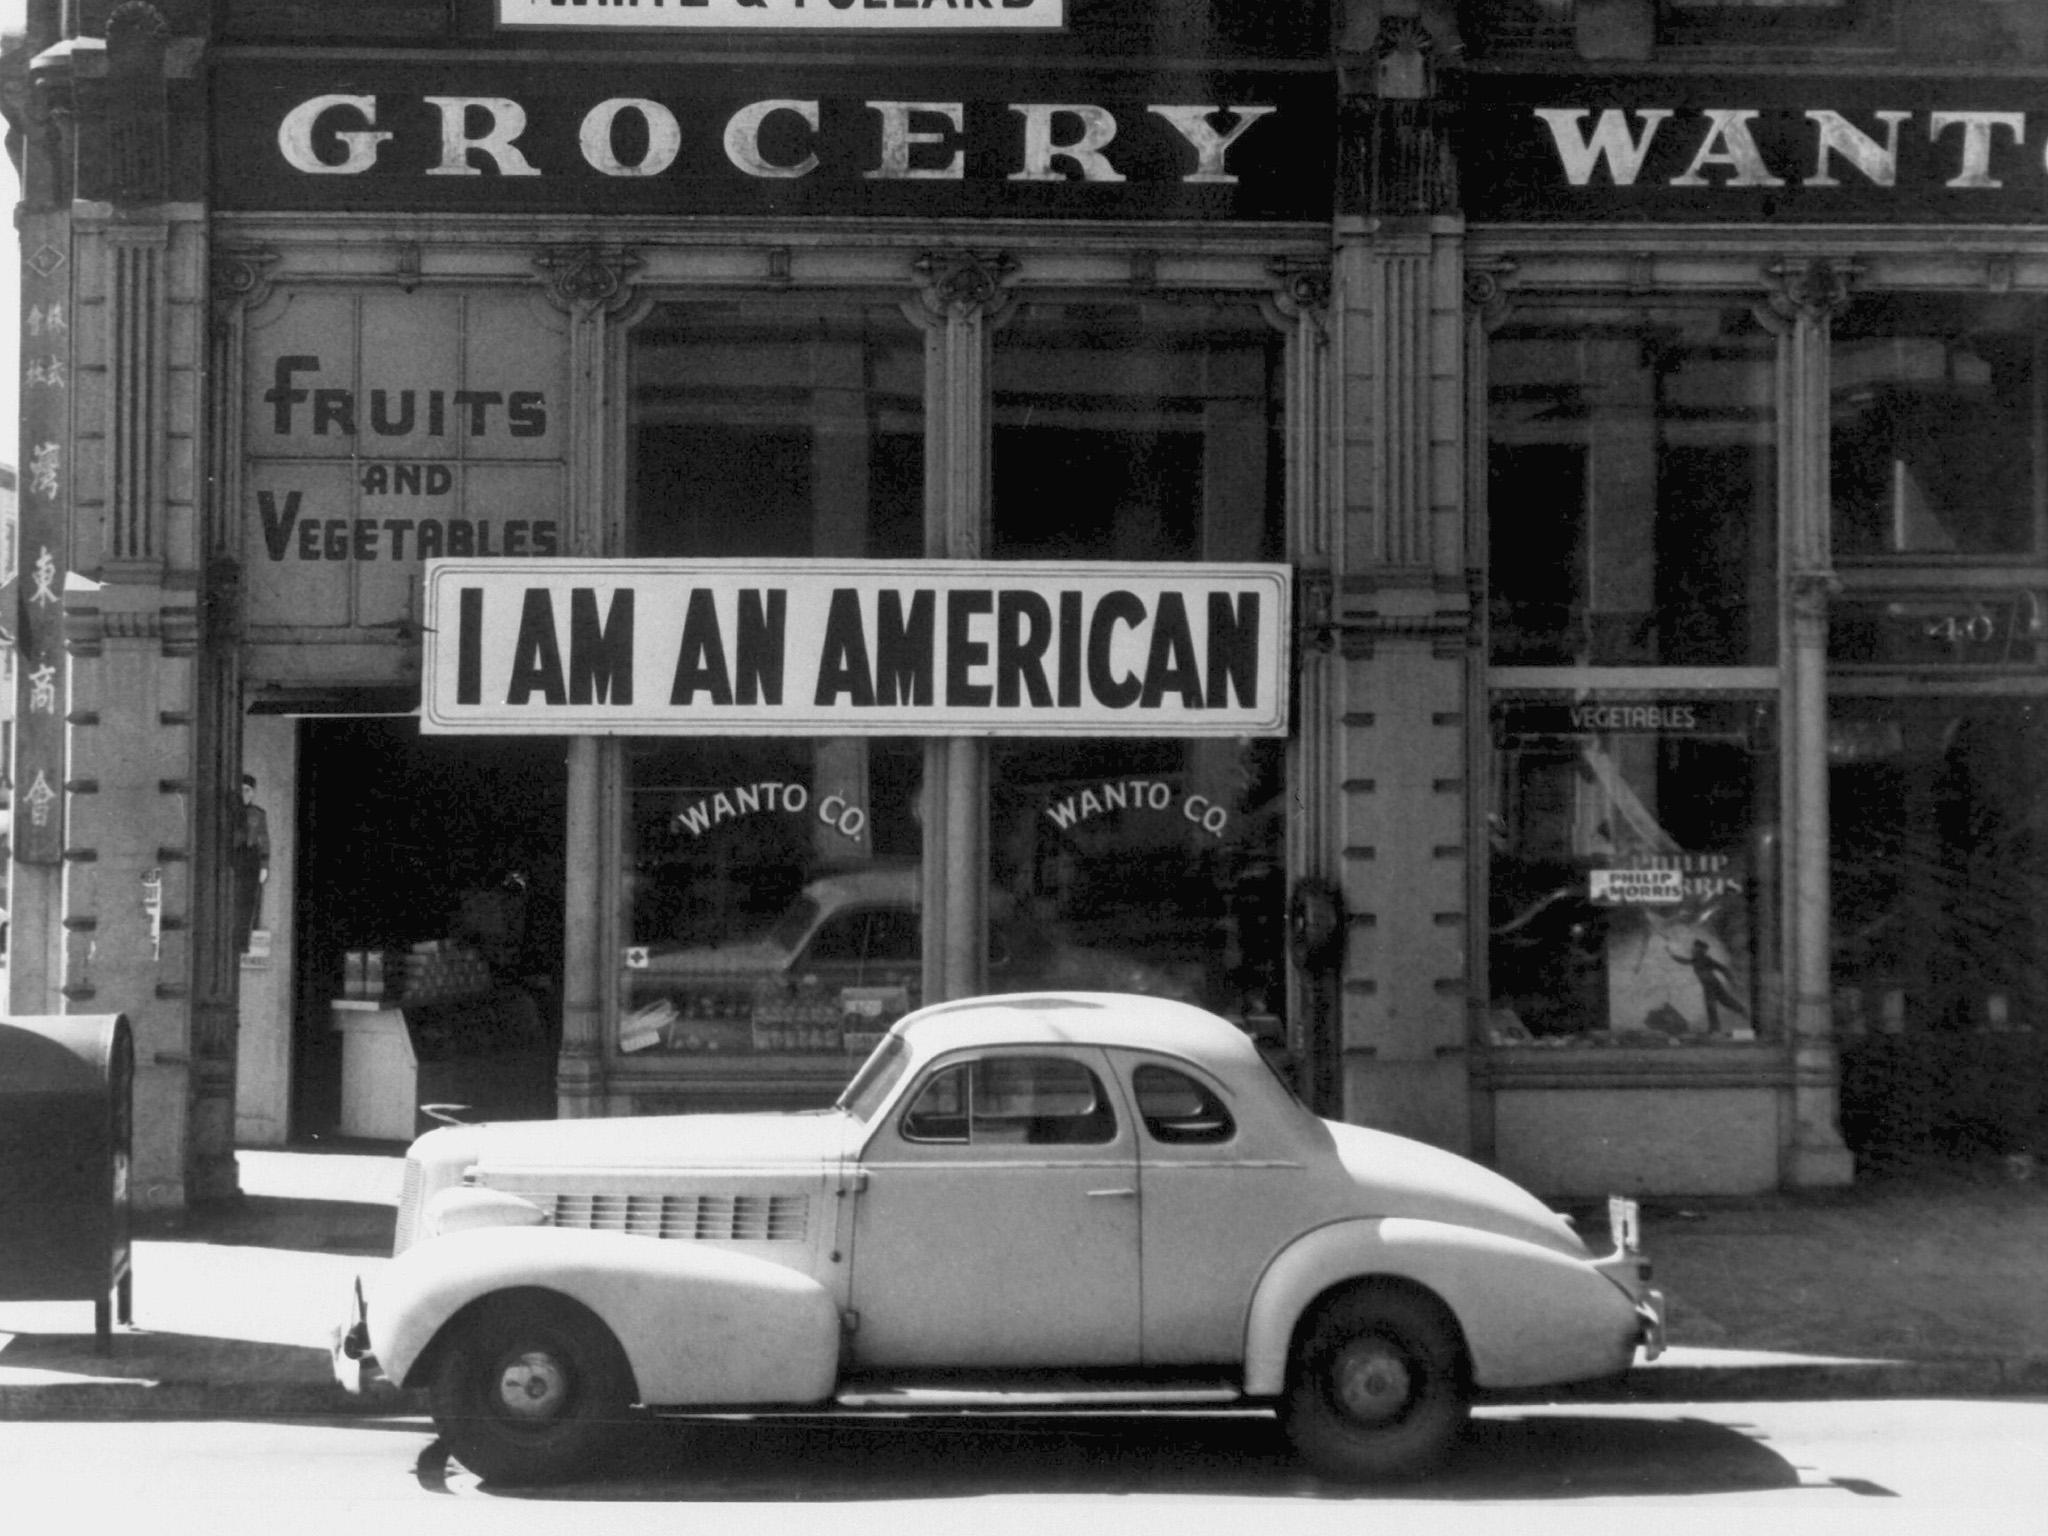 A shop in Oakland, California – its Japanese owner was forced into an internment camp shortly after this photograph was taken in 1942